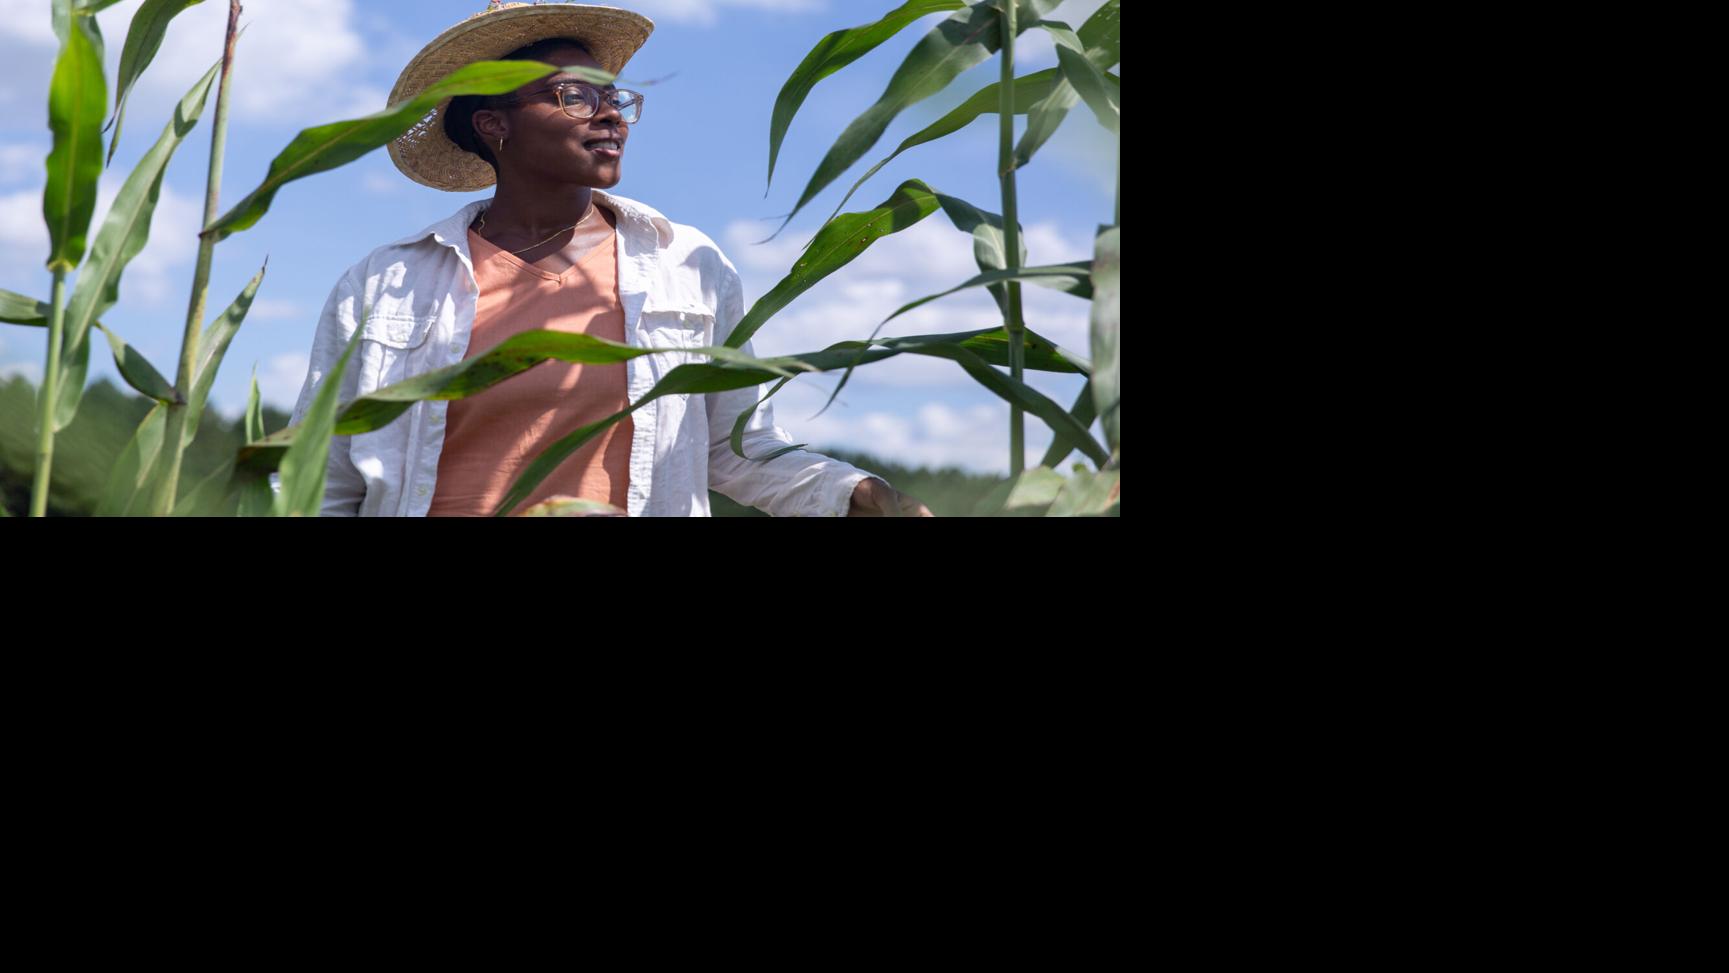 Black farmers use new approaches to revive rural areas in NC | State and Regional News